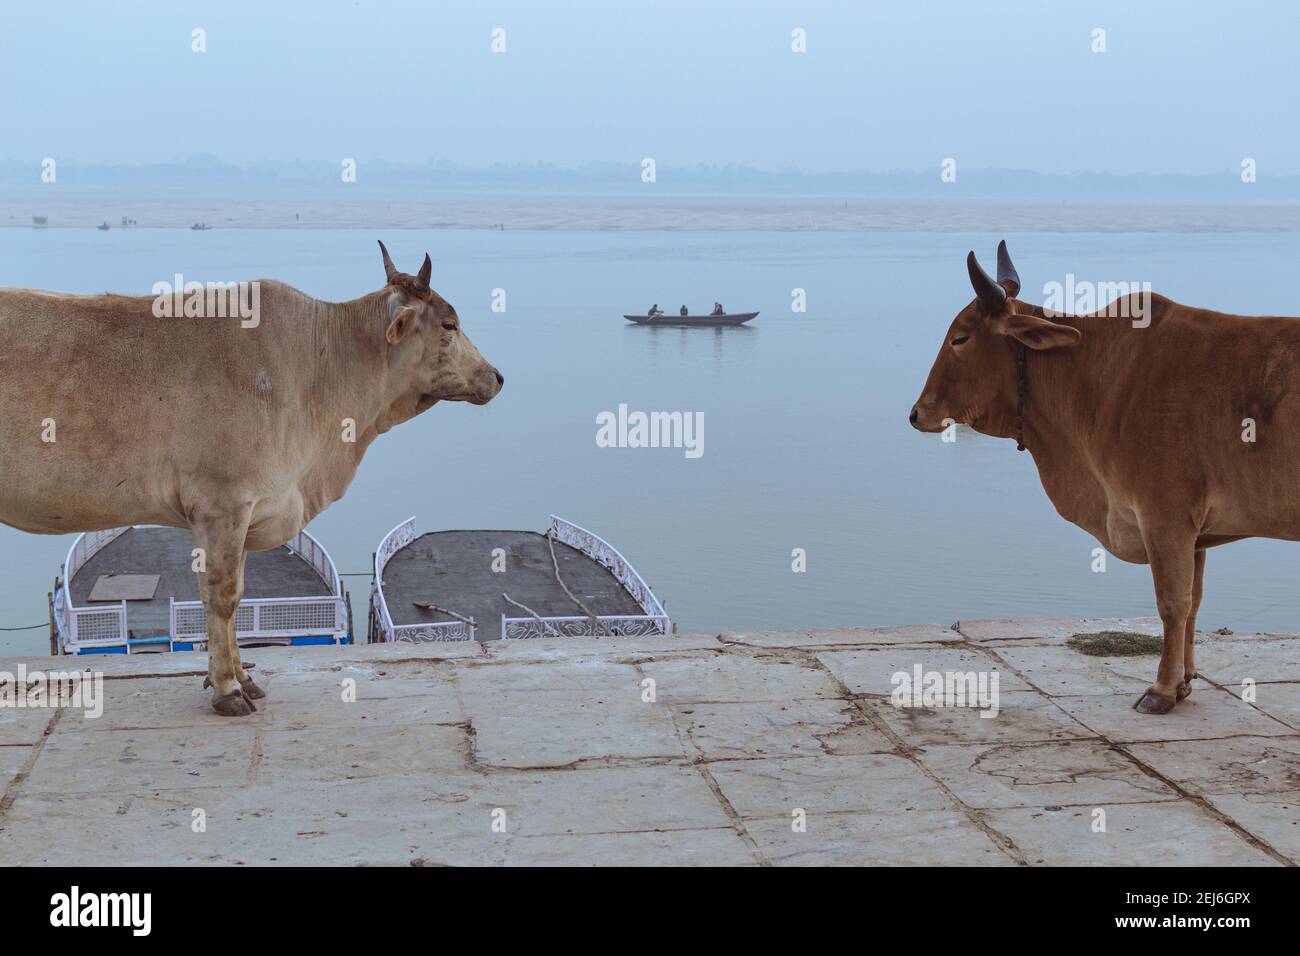 Typical scene in Varanasi, India: Indian cows in ancient embankment and a boat sailing on the Ganges River in the background. Stock Photo